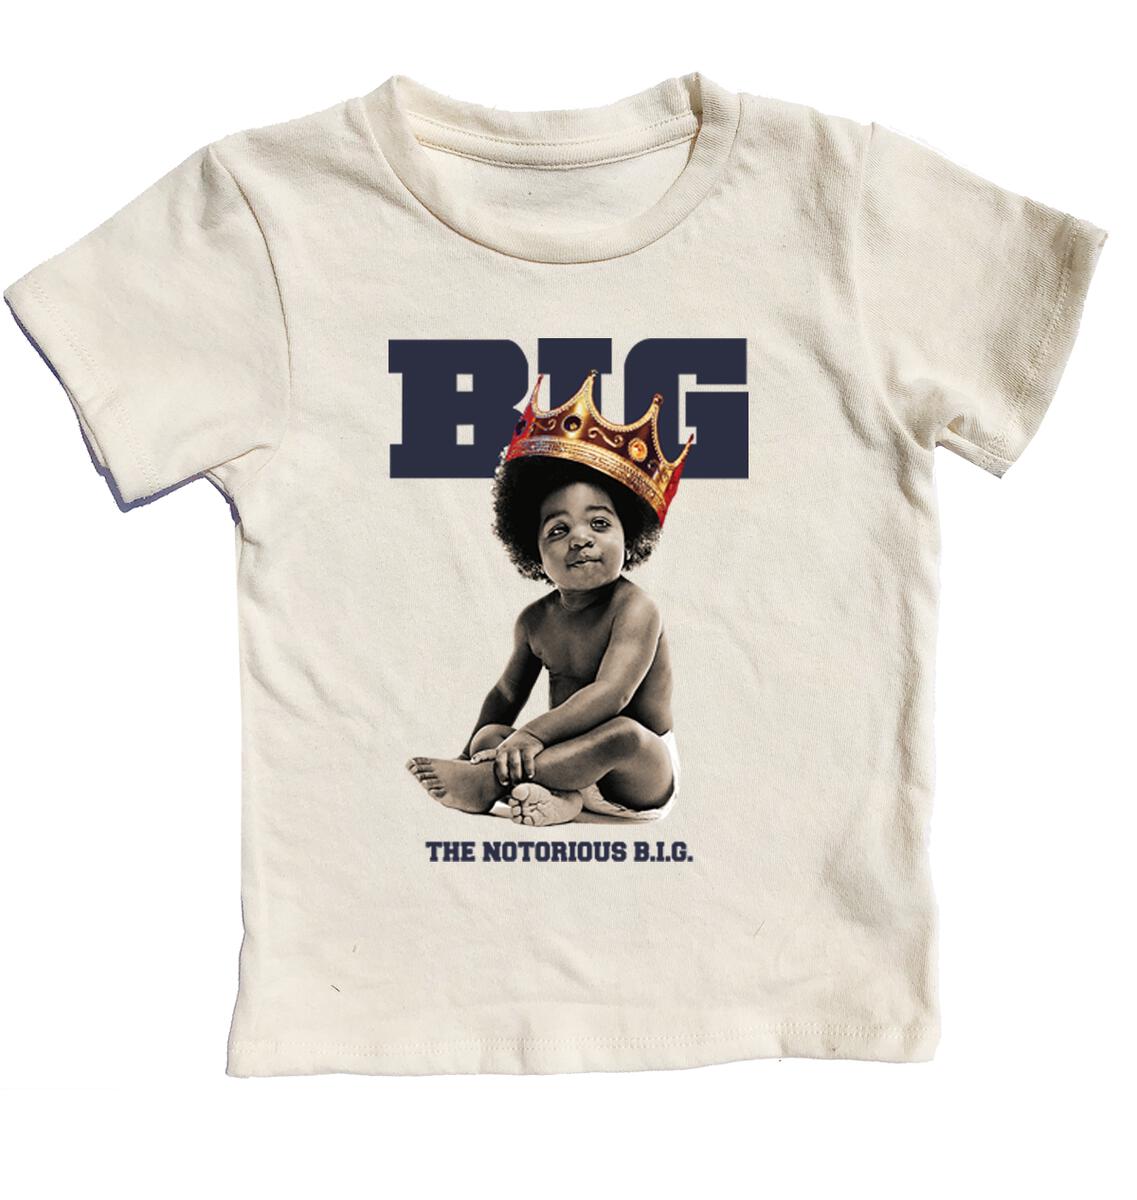 Rowdy Sprout - Biggie Smalls Organic SS Tee